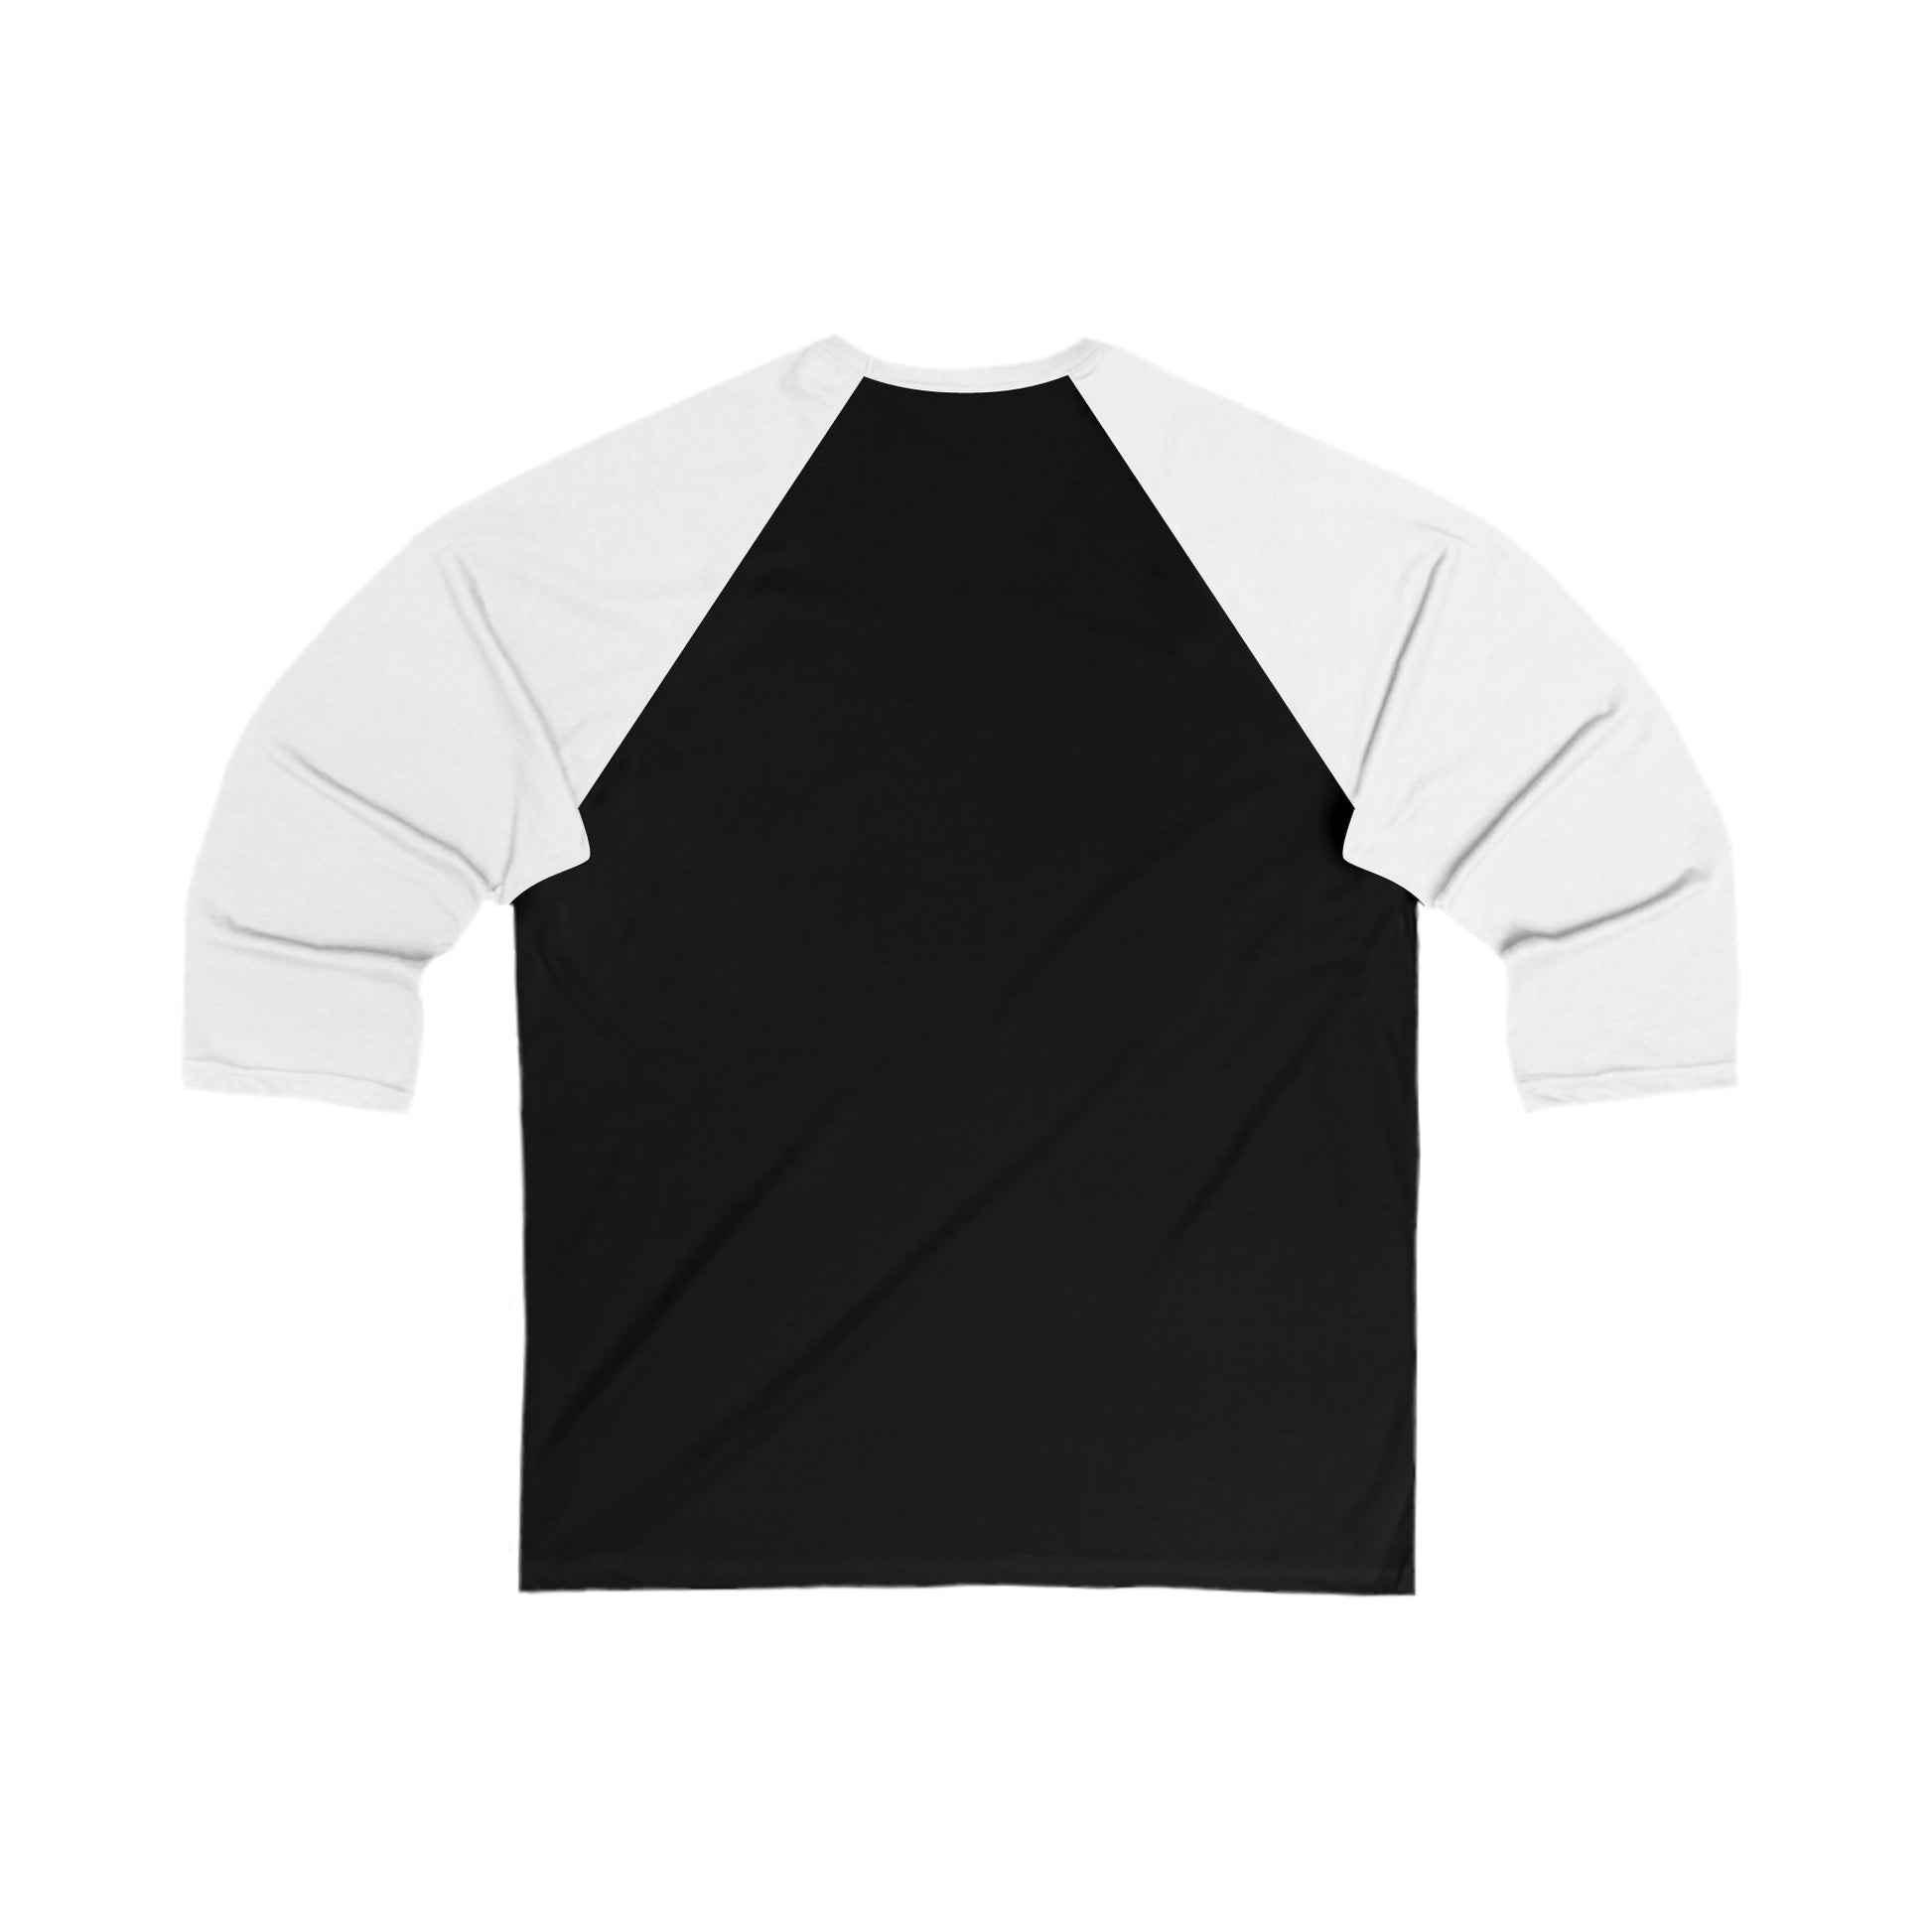 A black and white raglan t-shirt with 3/4 length sleeves, displayed on a plain white background, featuring a subtle Printify graphic.